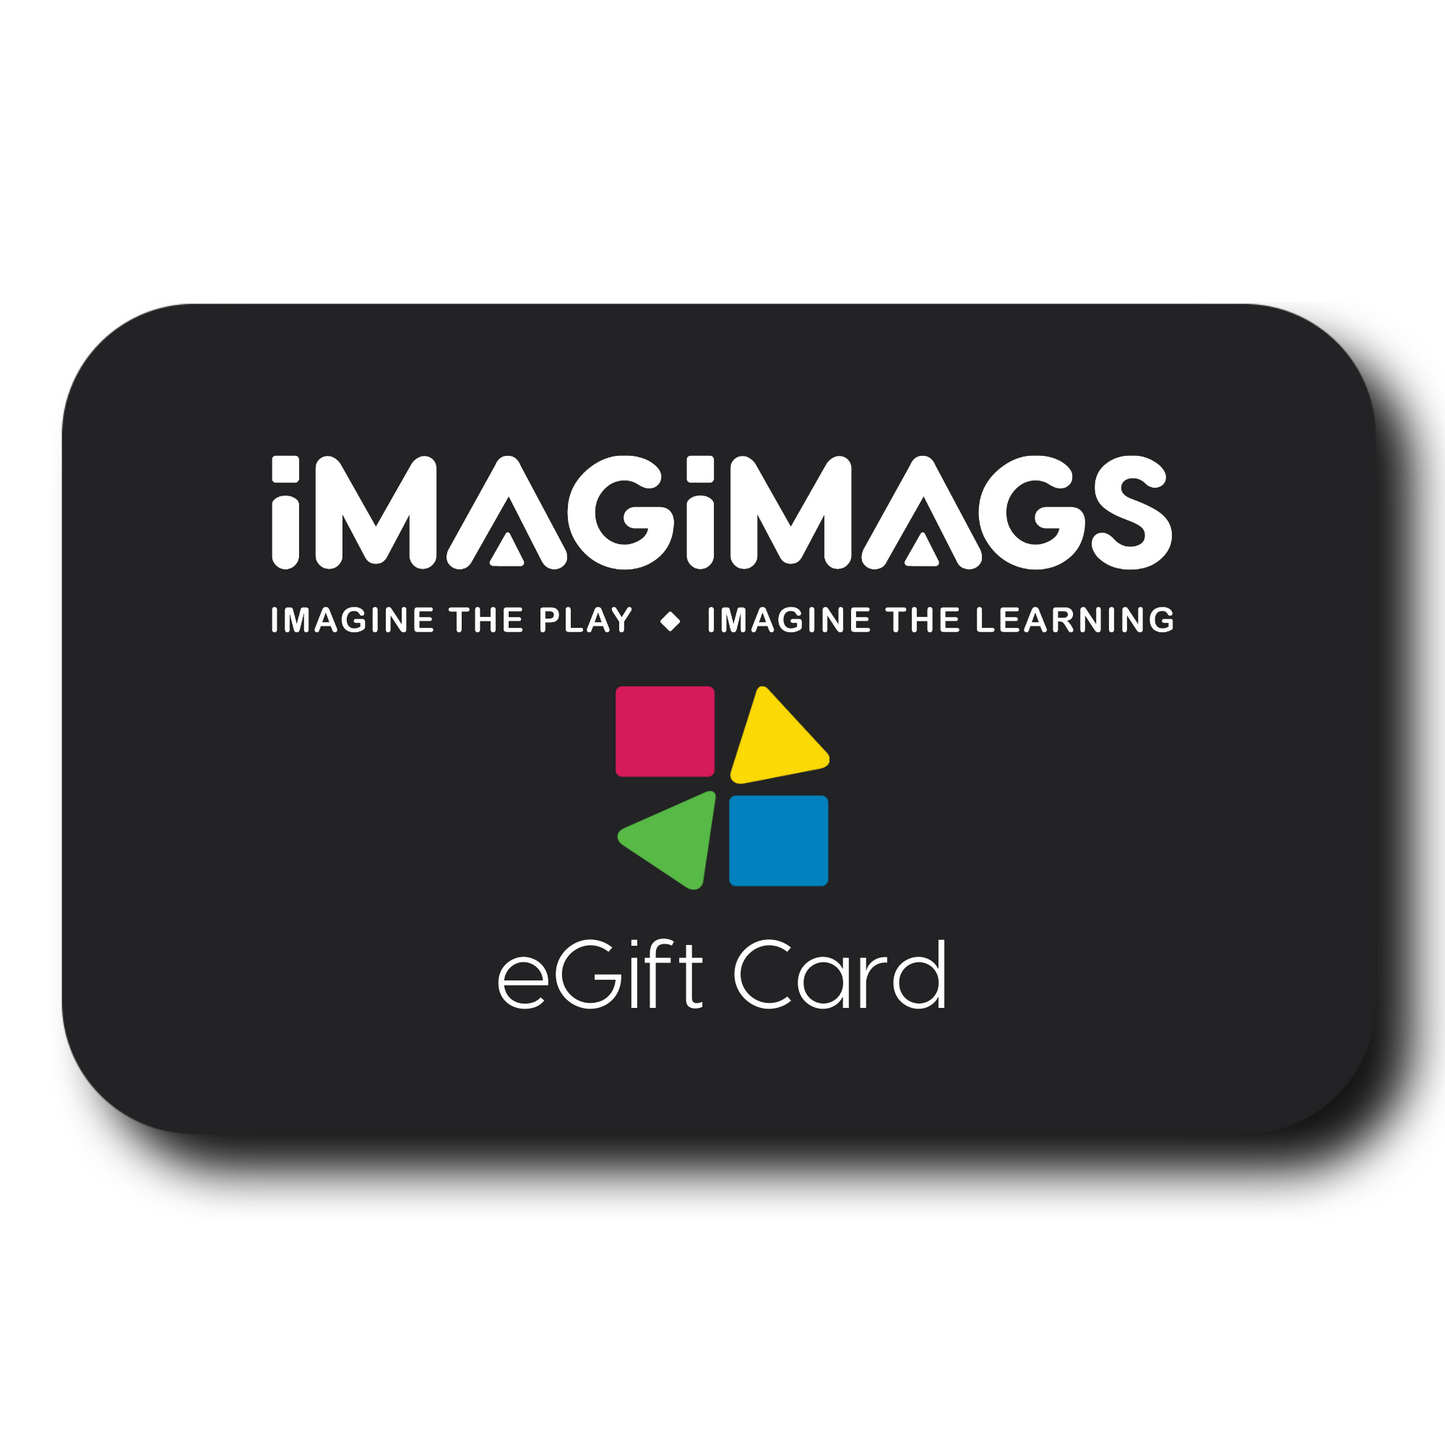 Imagimags Gift Card